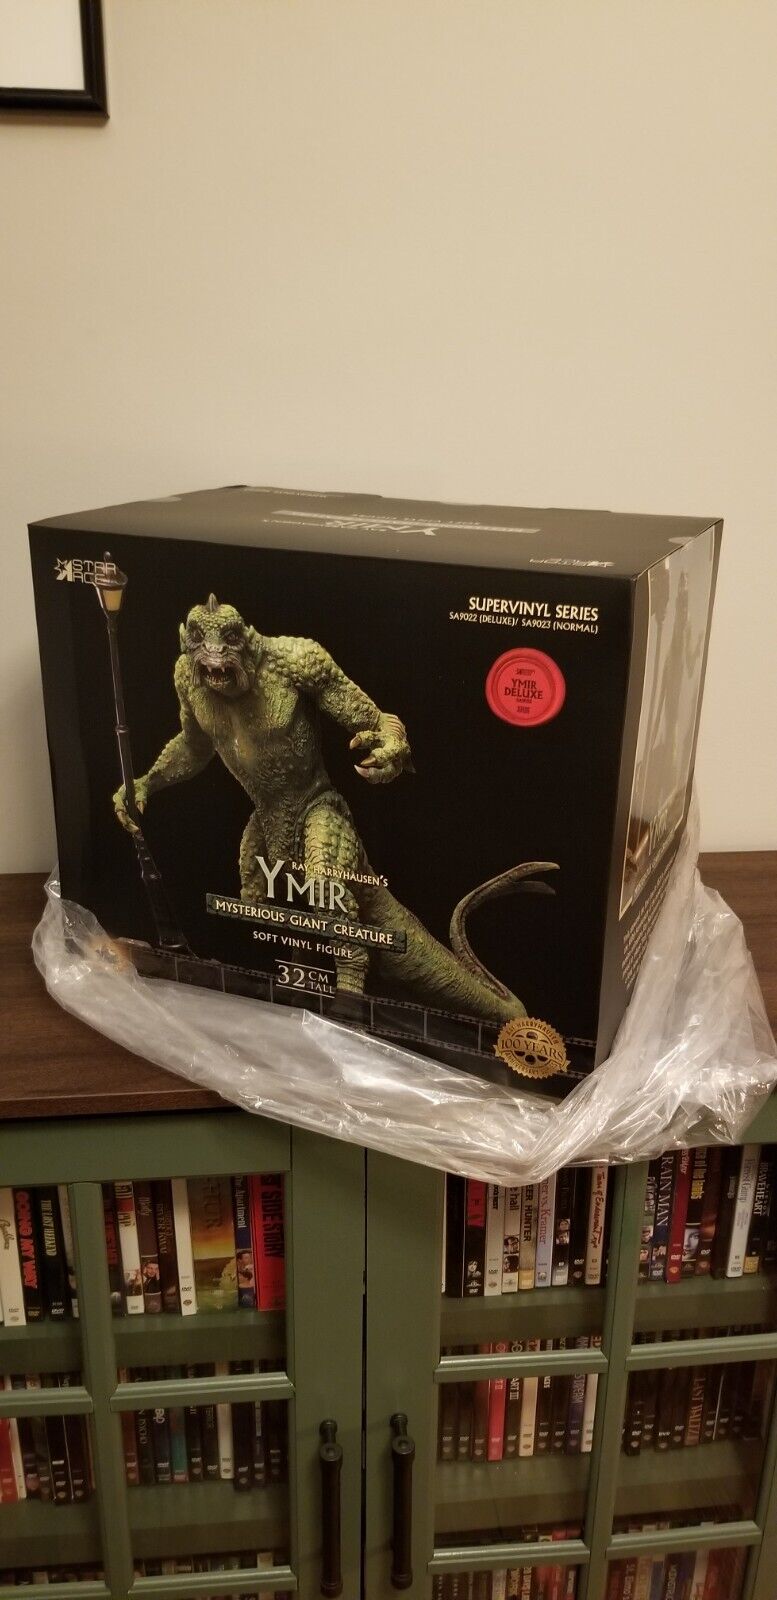 ***SIDESHOW**STAR ACE YMIR DELUXE** BRAND NEW bought through SIDESHOW**